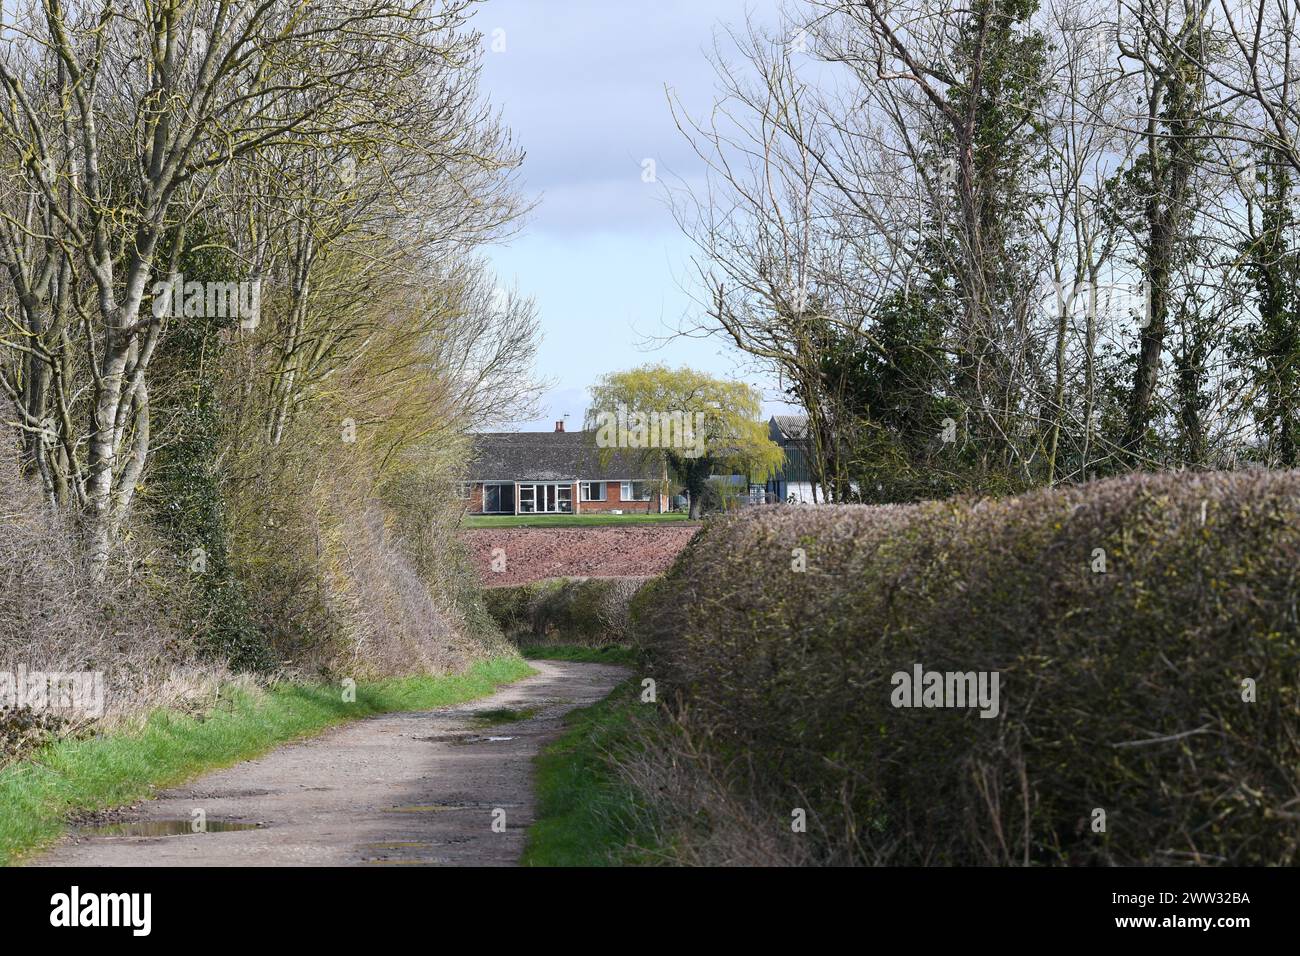 looking down a lane towards a house Stock Photo